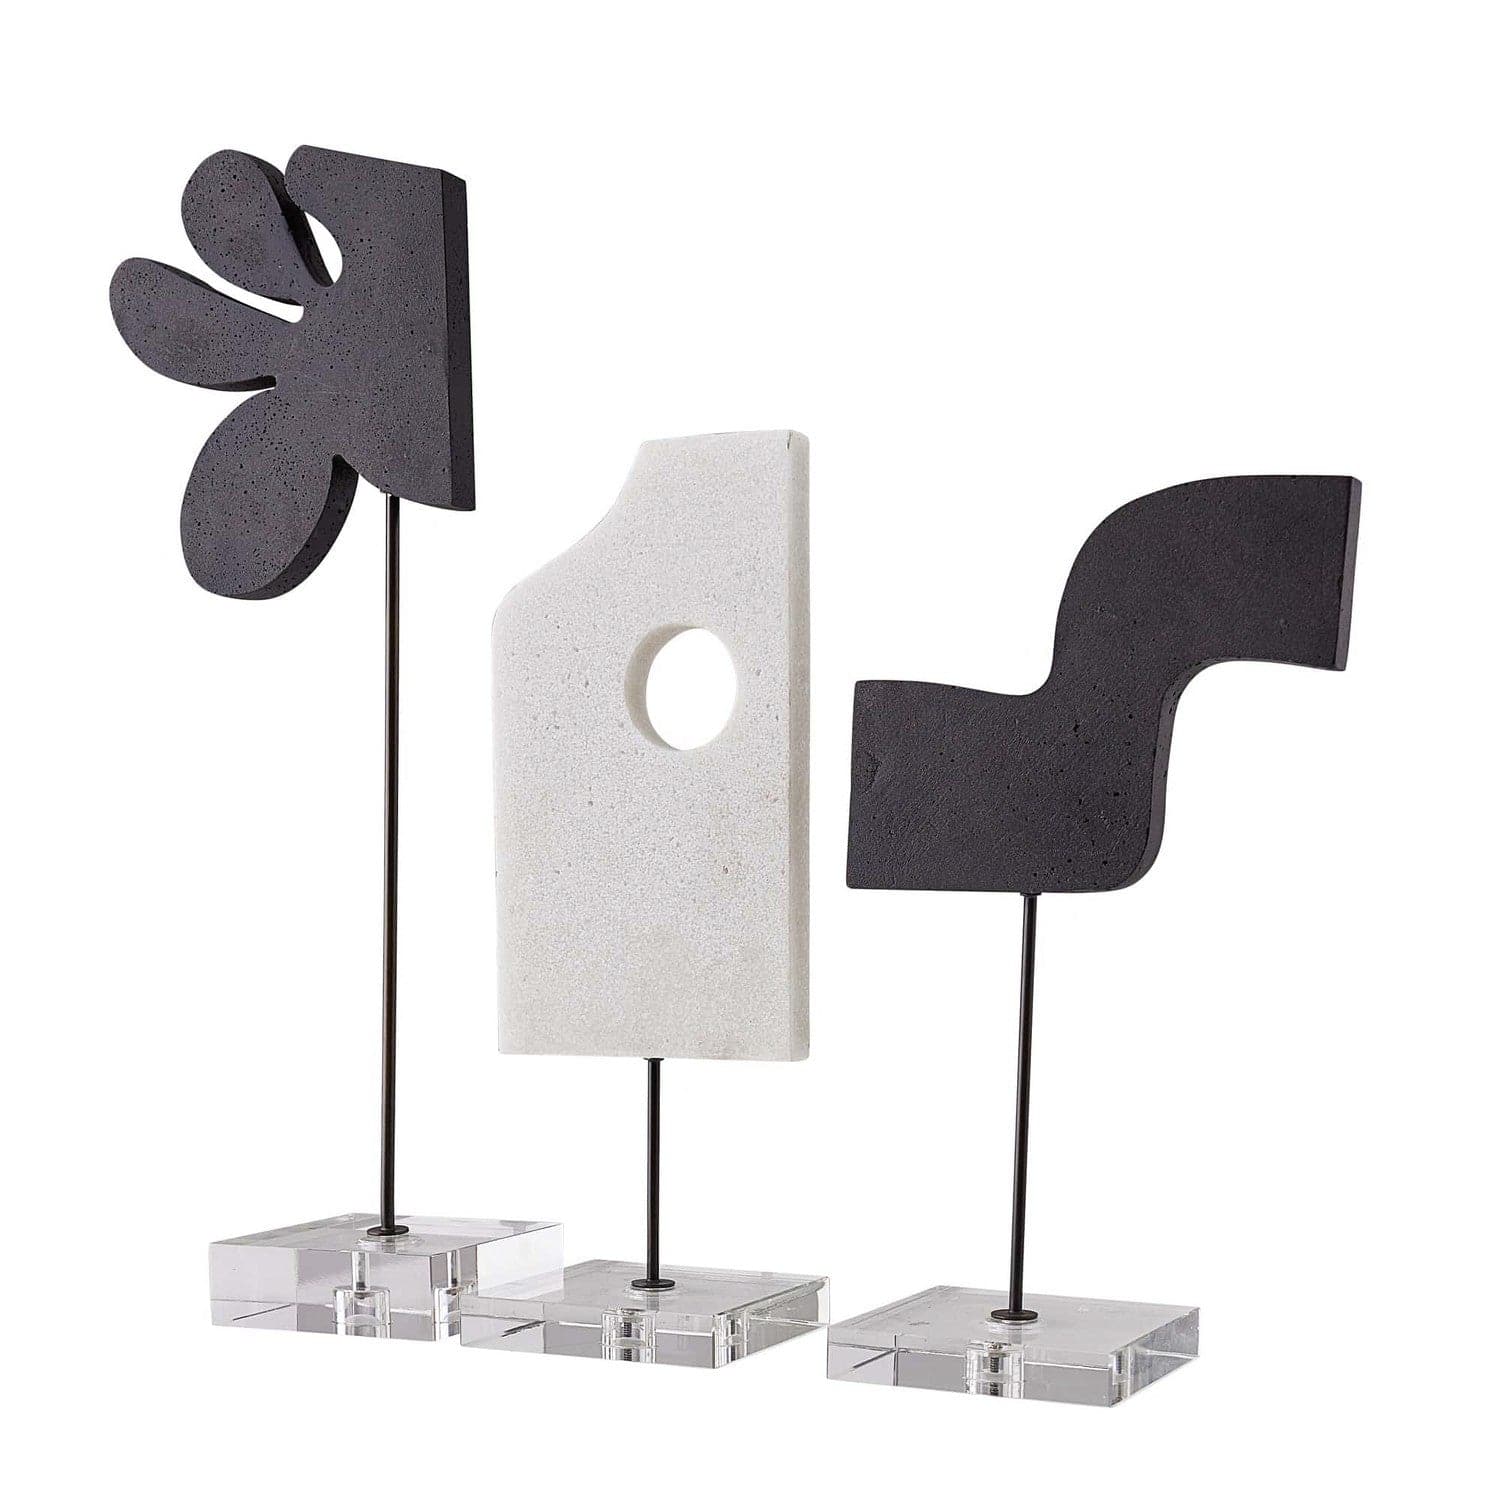 Sculptures, Set of 3 from the Uri collection in Charcoal finish